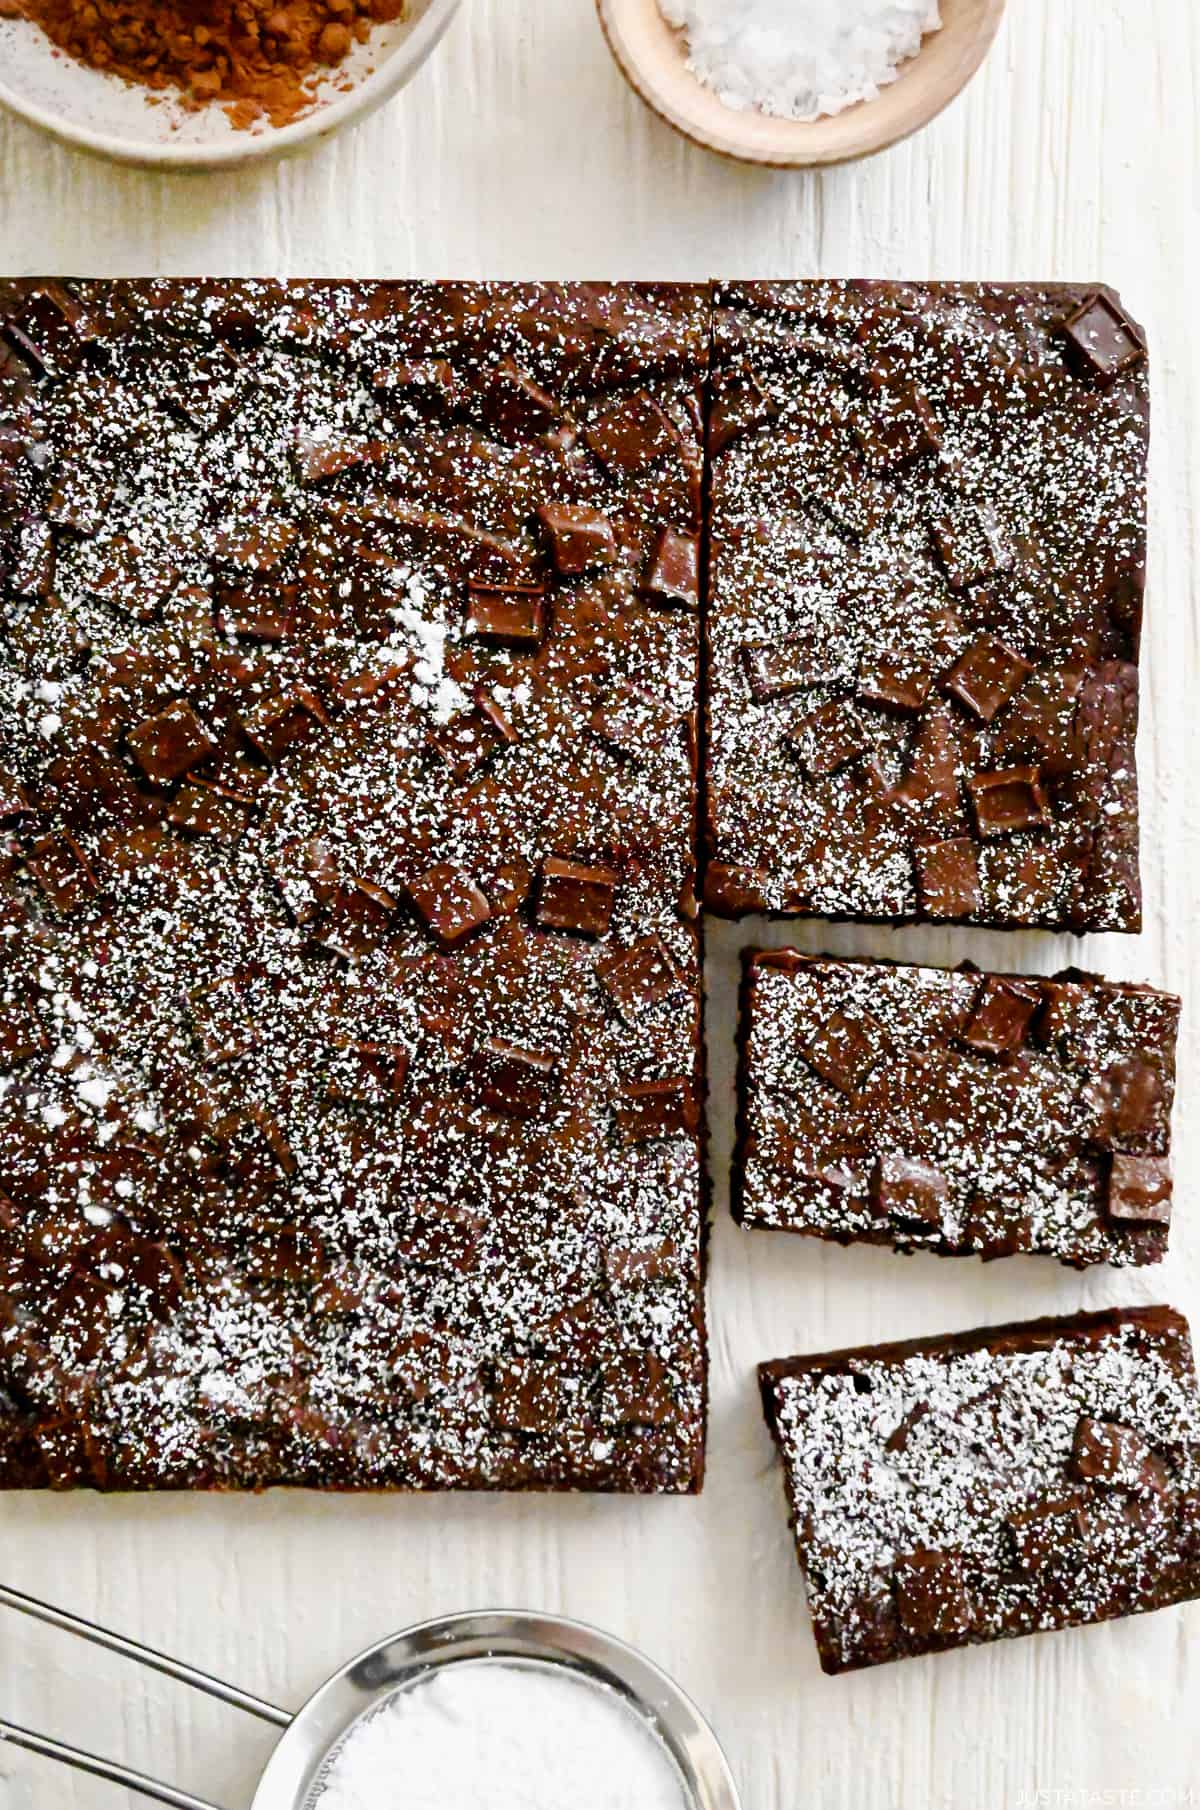 Homemade brownies studded with chocolate chunks dusted with powdered sugar.